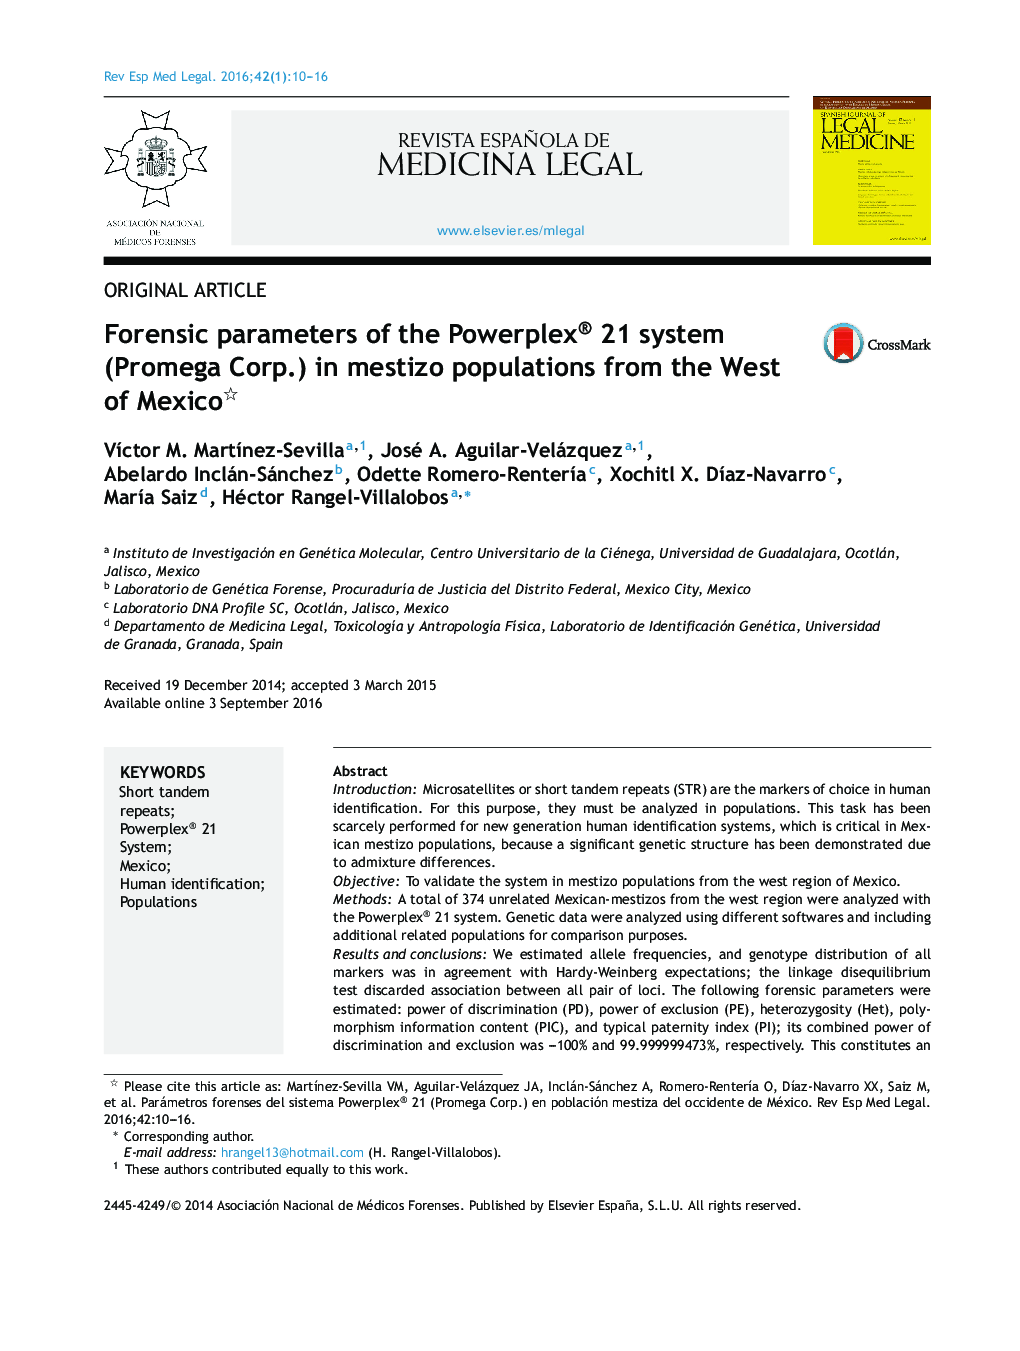 Forensic parameters of the Powerplex® 21 system (Promega Corp.) in mestizo populations from the West of Mexico